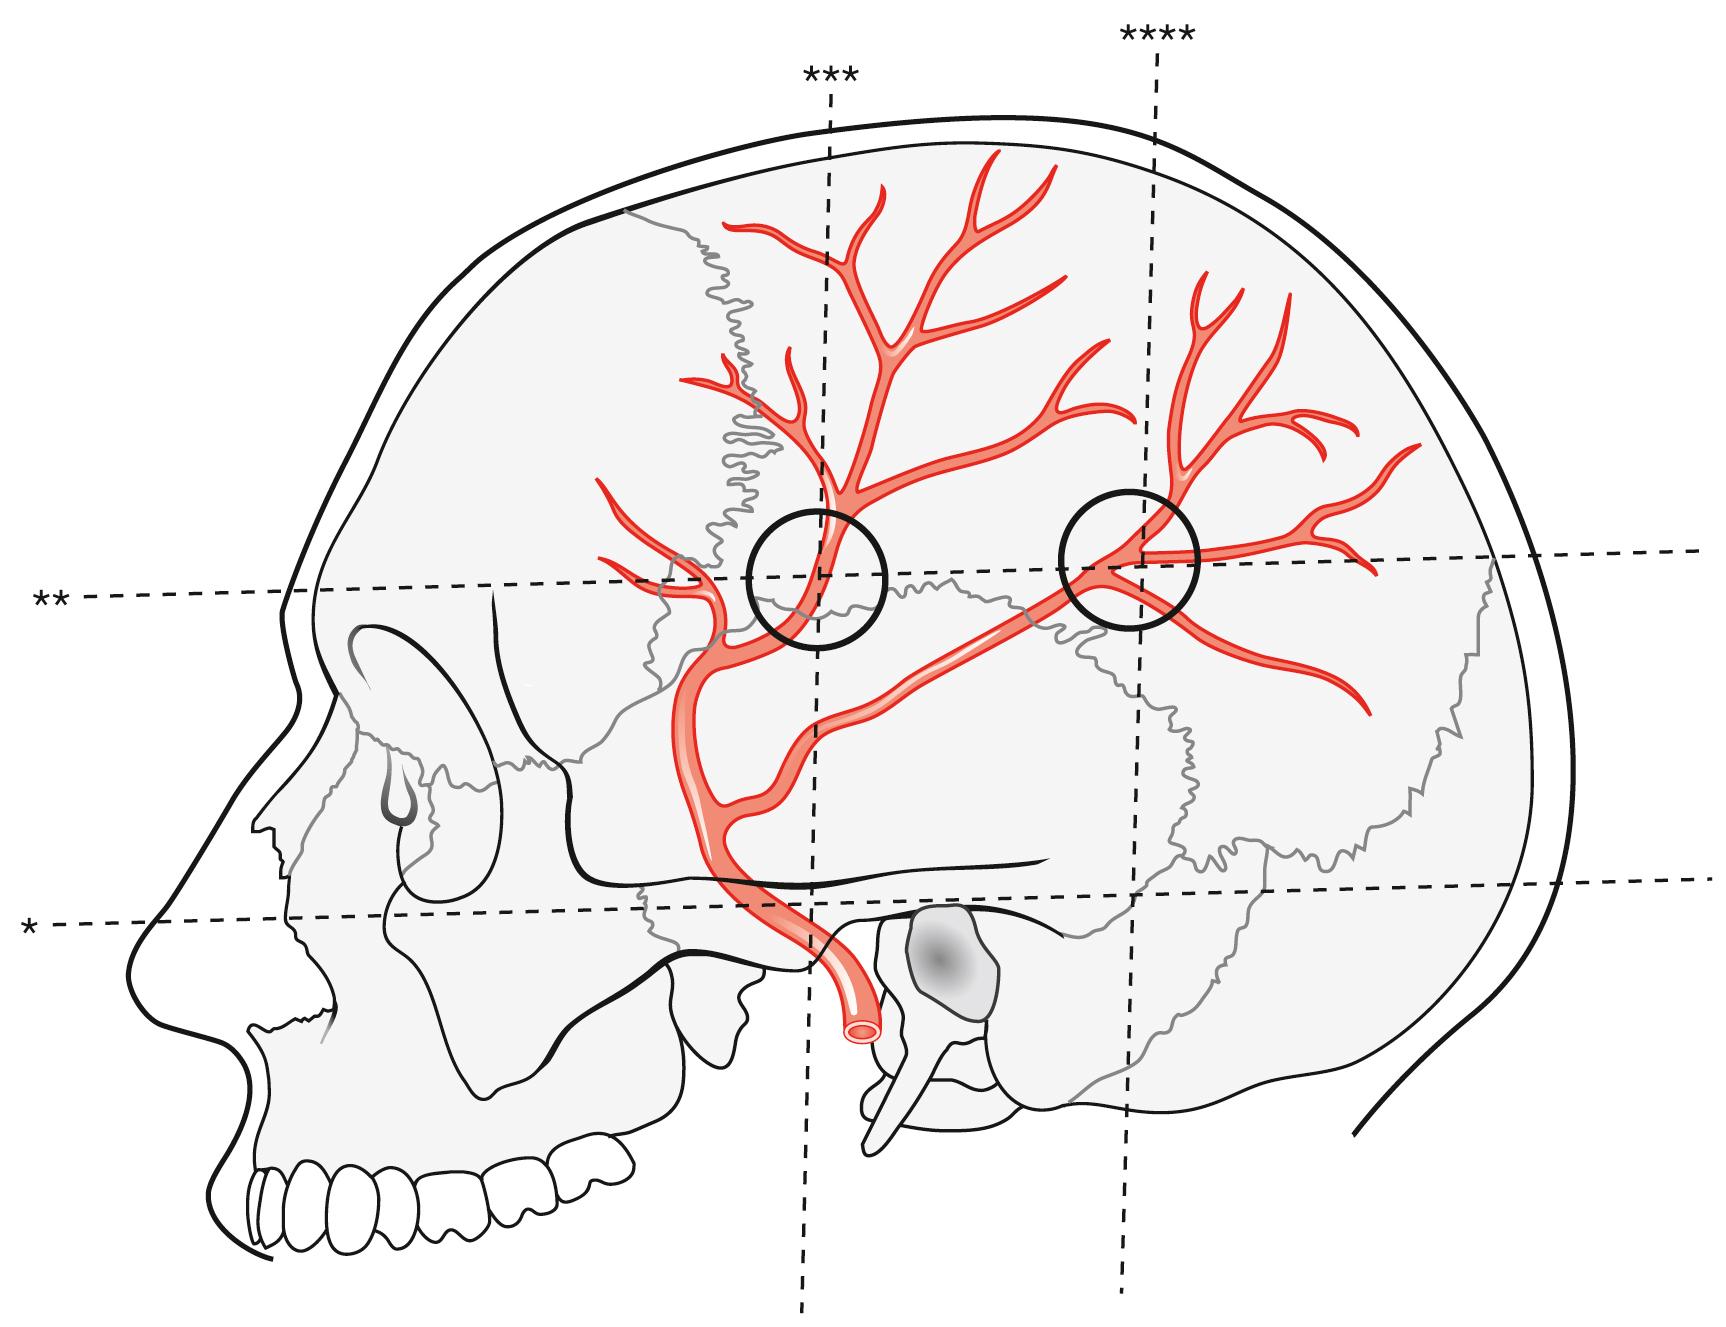 Fig. 12.6, Circles mark the projections of the main frontal and parietal branches of the middle meningeal artery onto the side of the skull.